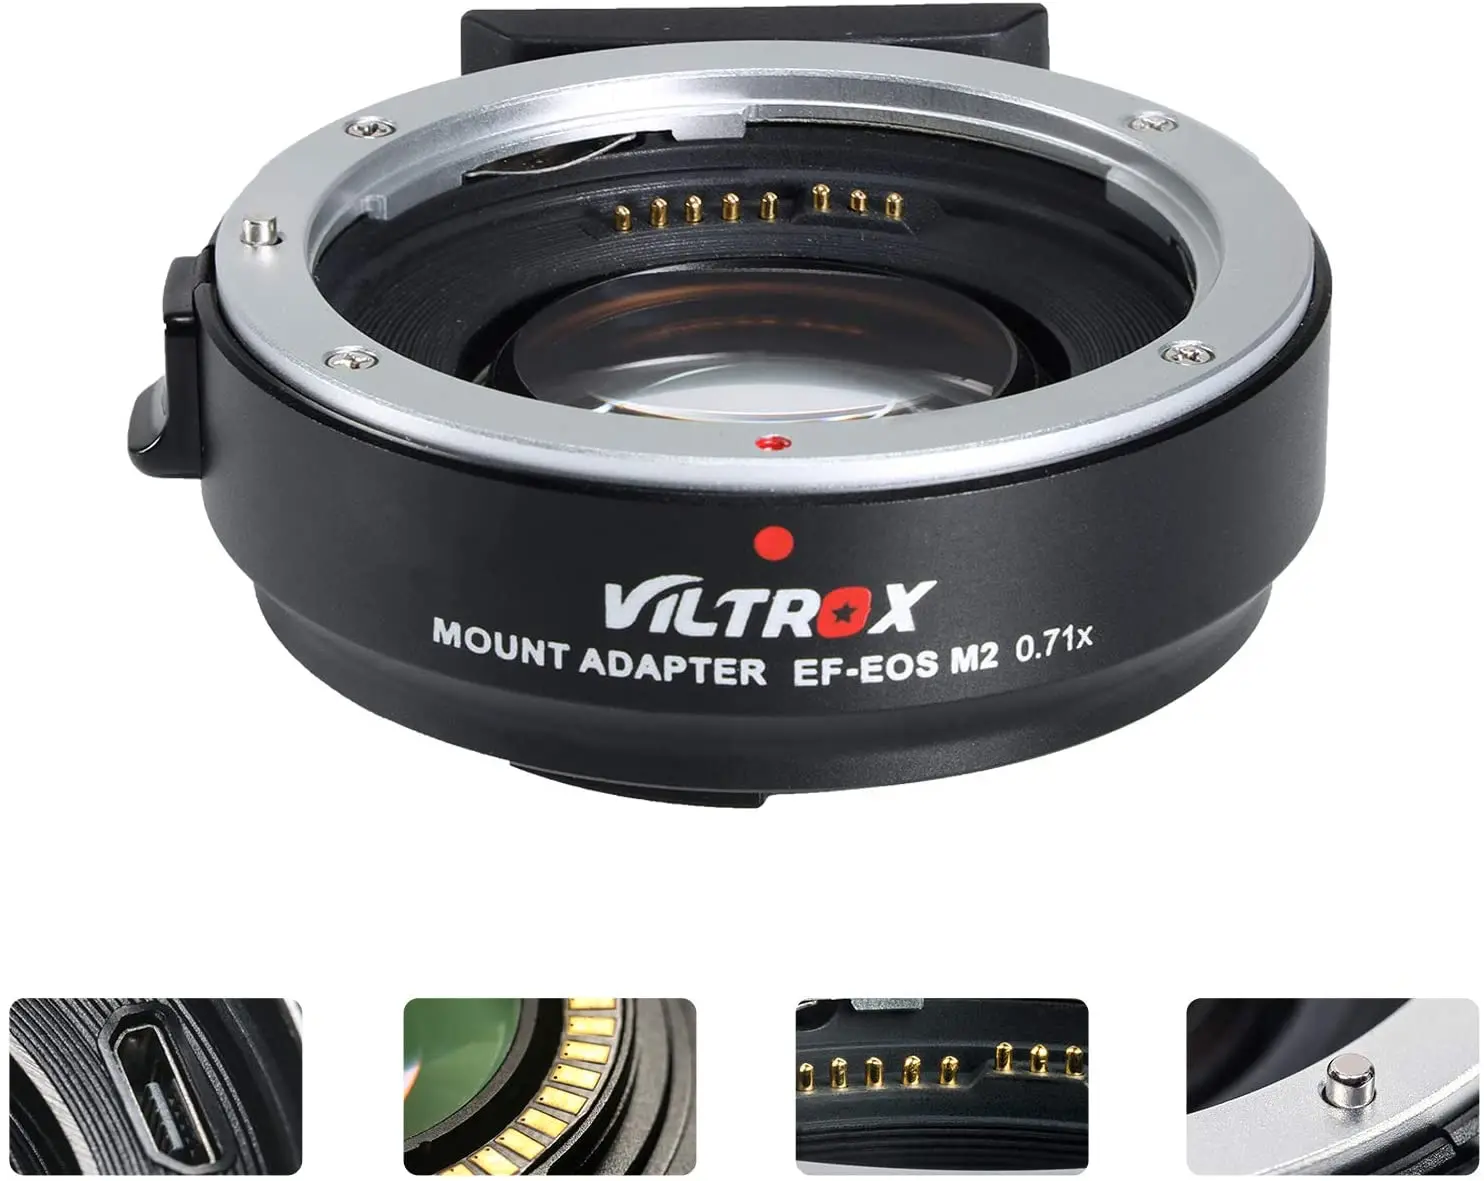 Viltrox EF-EOS M2 R Focal Reducer Booster Adapter Auto-focus 0.71x for Canon EF mount lens to EOSM Camera M6 M3 M5 M10 M100 M50